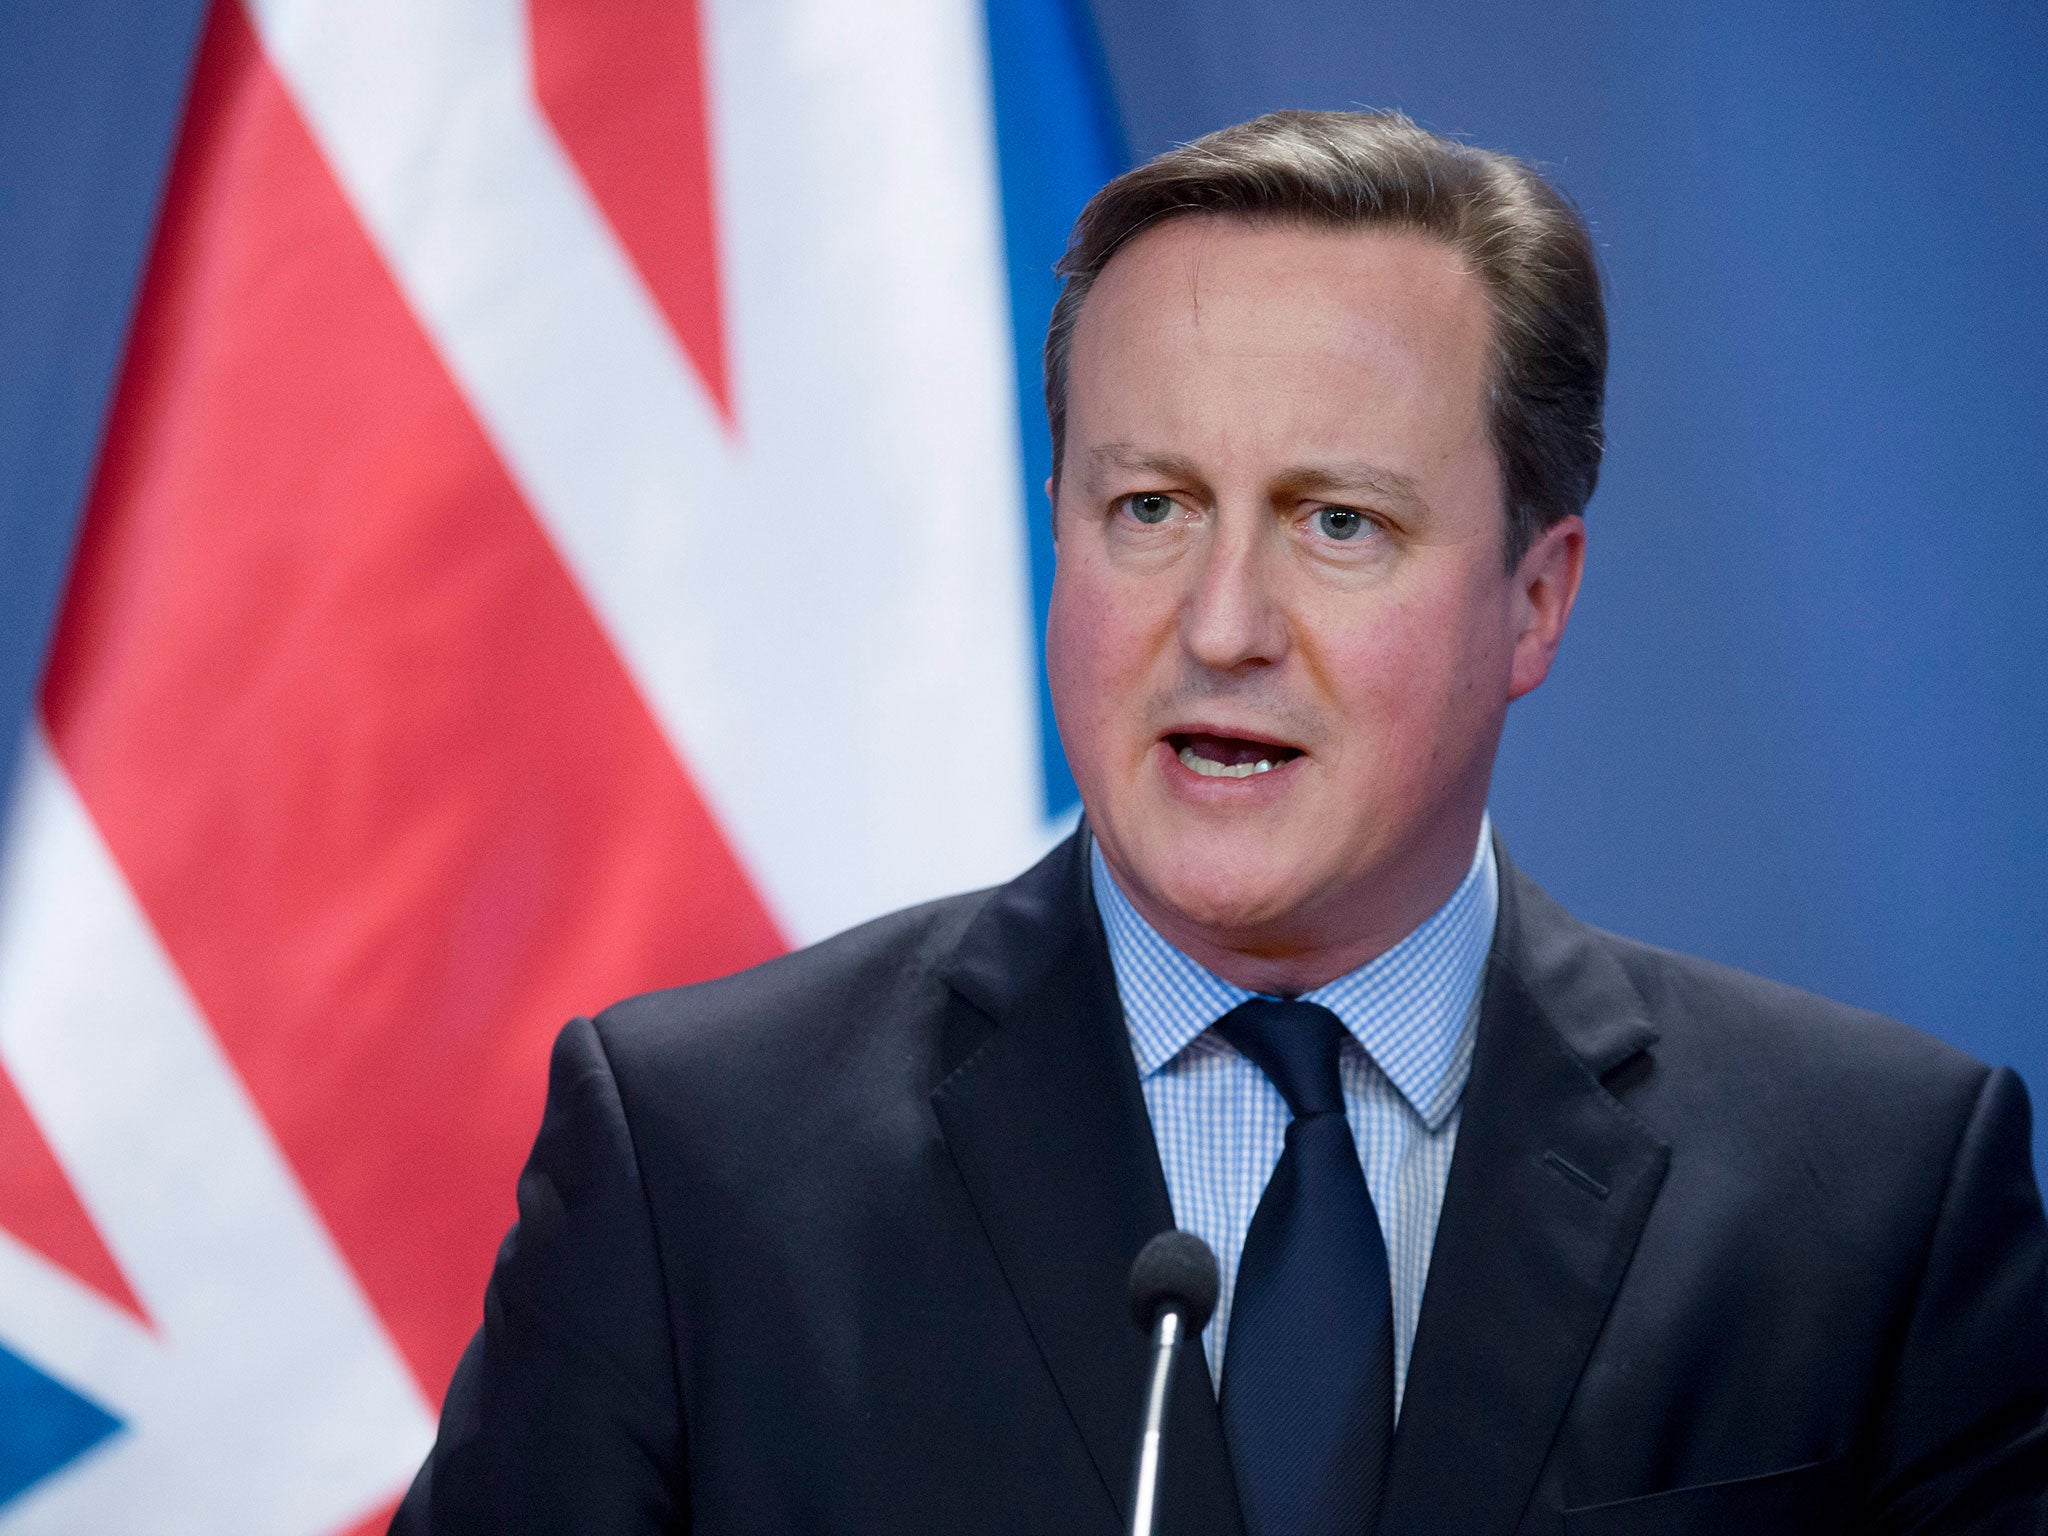 David Cameron speaking at a press conference in Hungary